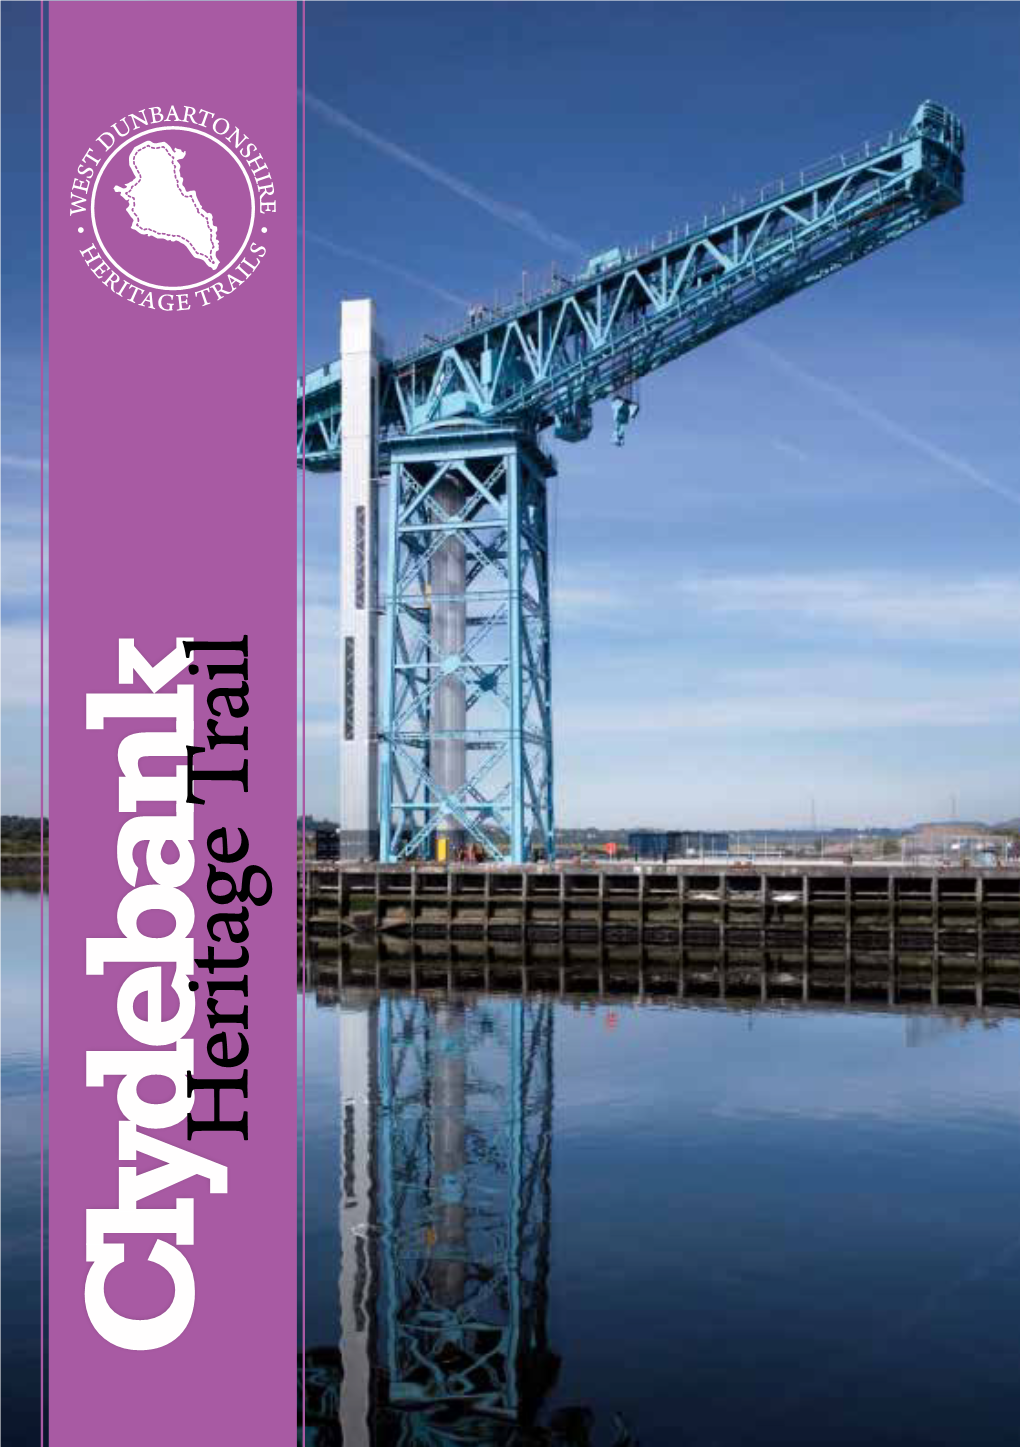 Clydebankheritage Trail 16